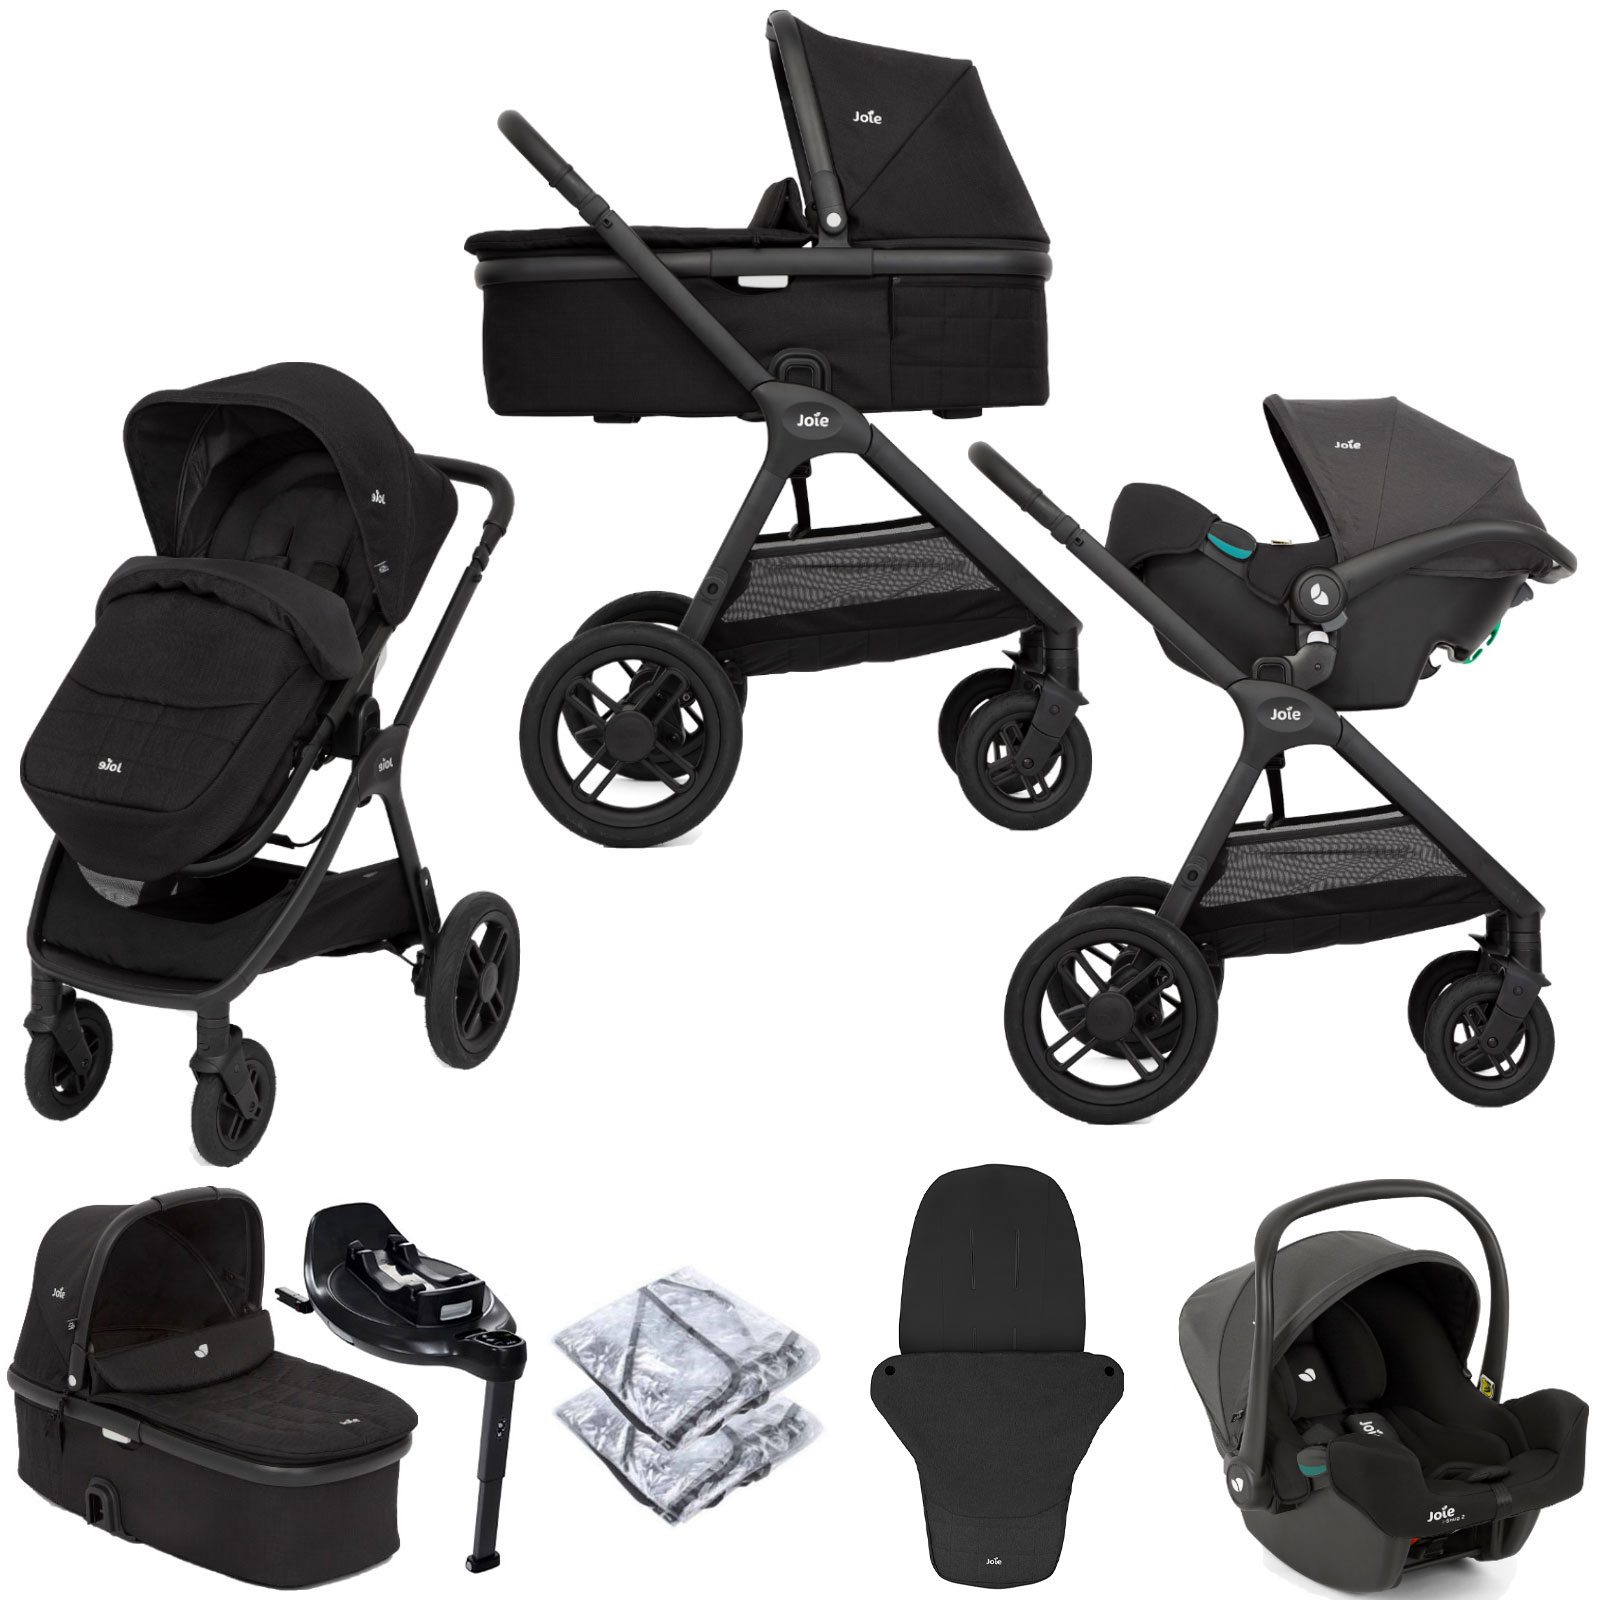 Joie Honour Pushchair Travel System with Carrycot & i-Base Encore ISOFIX Base - Shale